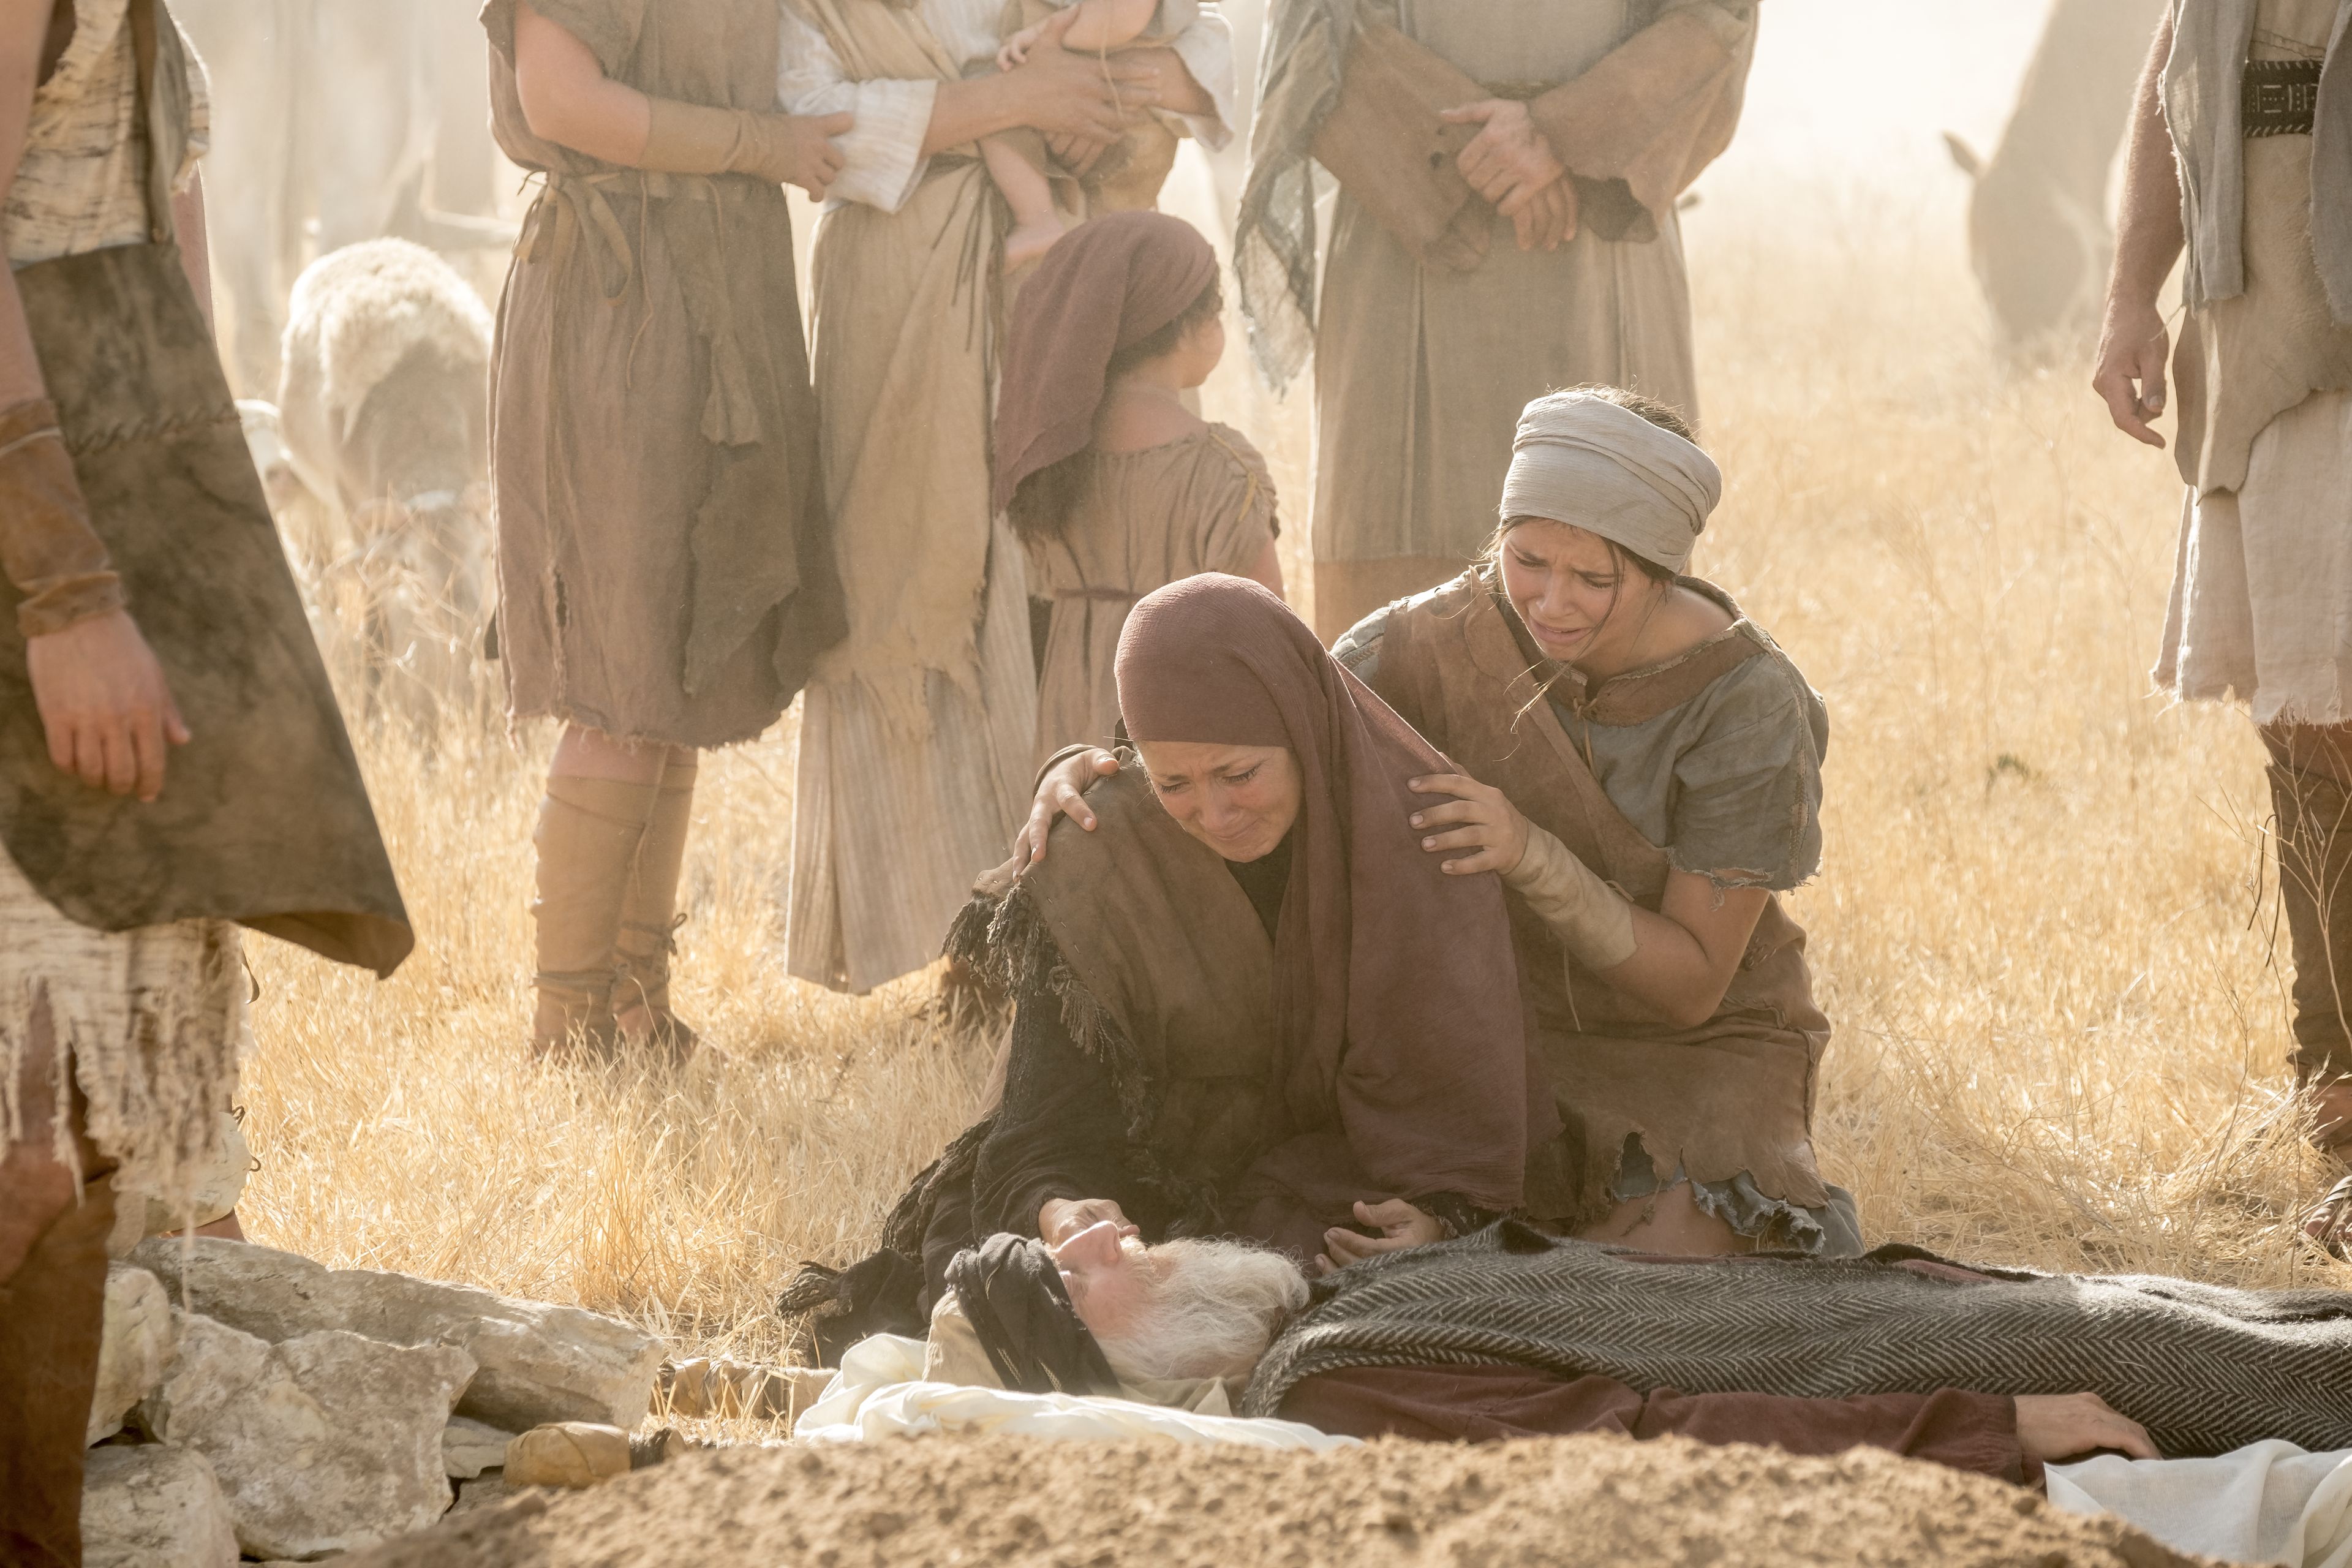 Ishmael's wife and daughter mourn his death.